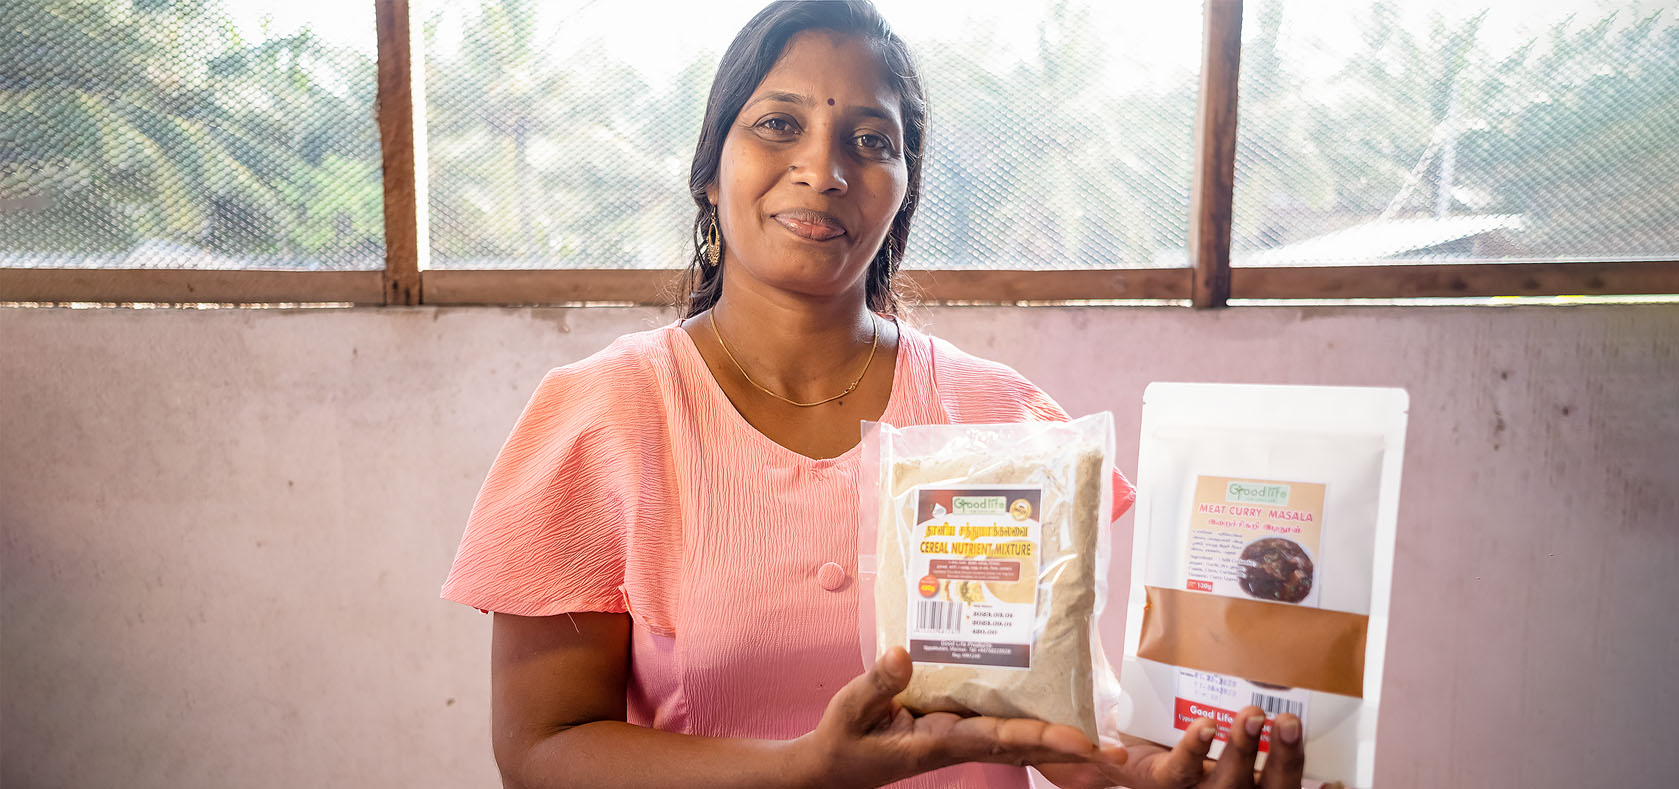 Jena shows some of the products she makes at her store in Uppukulam, Mannar in Sri Lanka’s Northern province on 14 March 2023. Photo: UN Women Sri Lanka/Ruvin De Silva